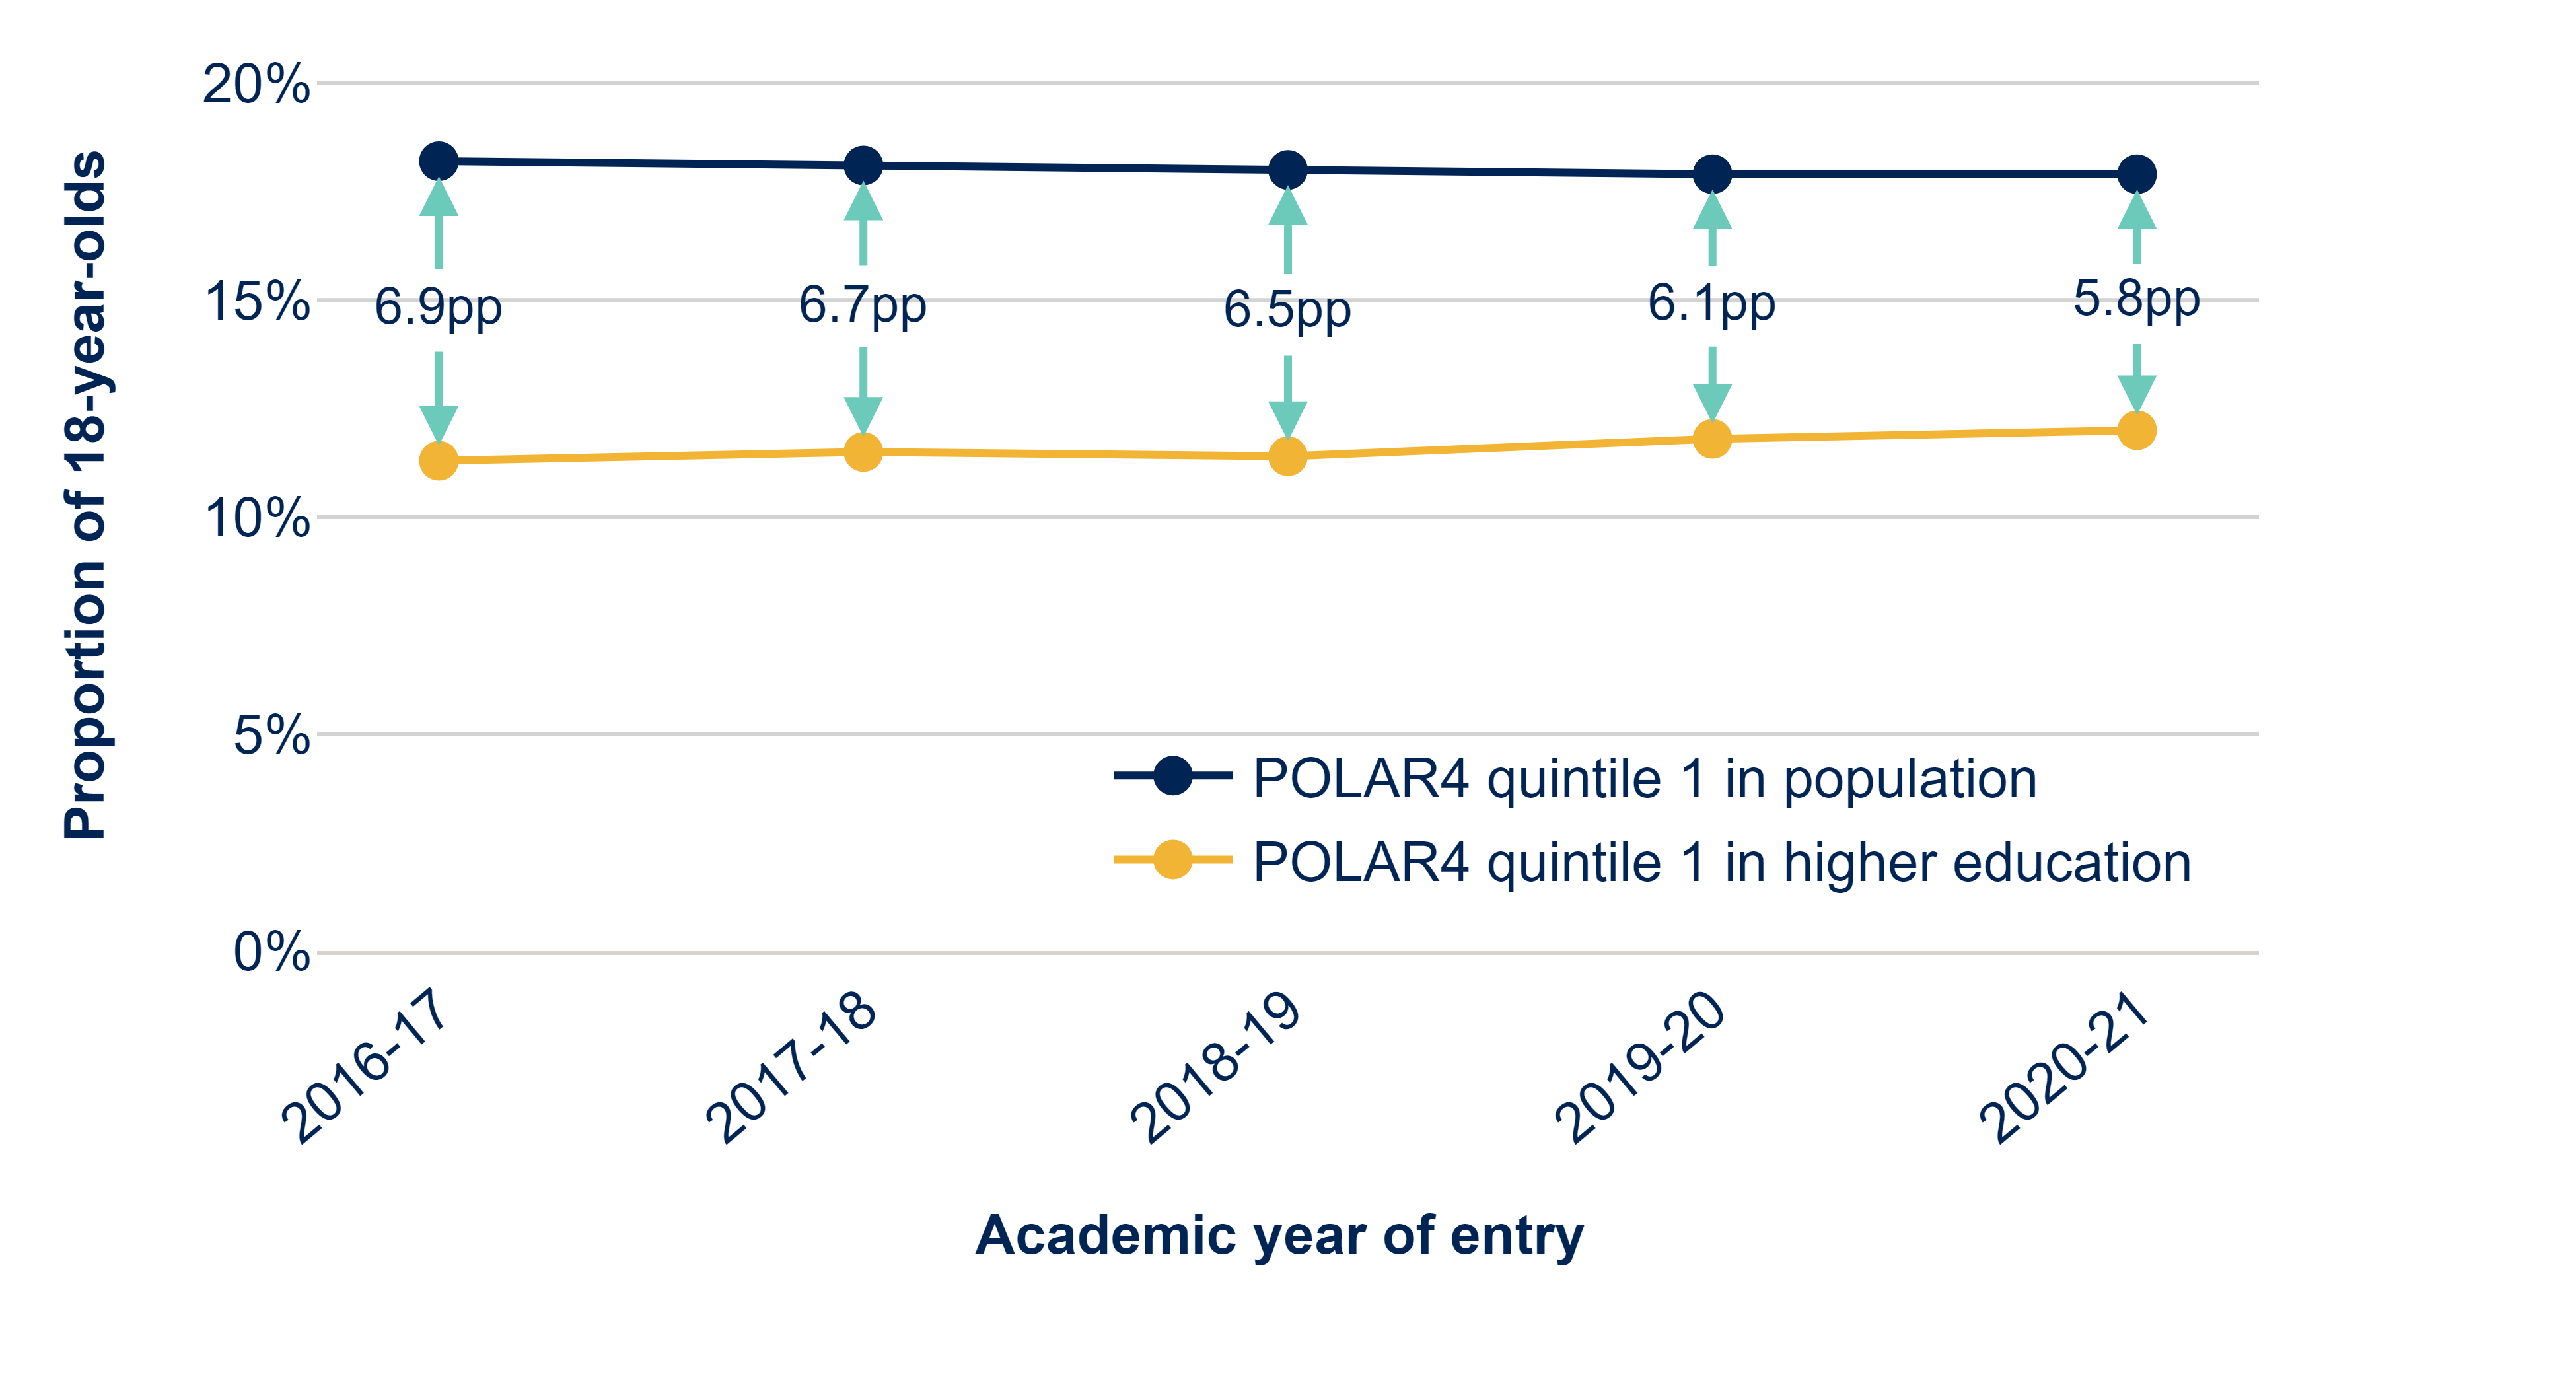 This graph has two lines, one for POLAR4 quintile 1 in the population and one for POLAR4 quintile 1 in higher education. It shows the proportion of 18-year-olds in each of these groups for each year. The bottom line is for POLAR4 quintile 1 in higher education, which starts at around 11.3 per cent in 2016-17 and increases slightly to 12 per cent in 2020-21. The other line is for POLAR4 quintile 1 in the population and the proportions of 18-year-olds are higher in every year. They change very little over the time period: from 18.2 per cent in 2016-17 to 17.9 per cent in 2020-21. The gaps that exist between these two lines are also shown and they are reducing in size very slightly each year. They change from 6.9 percentage points in 2016-17 to 5.8 percentage points in 2020-21.